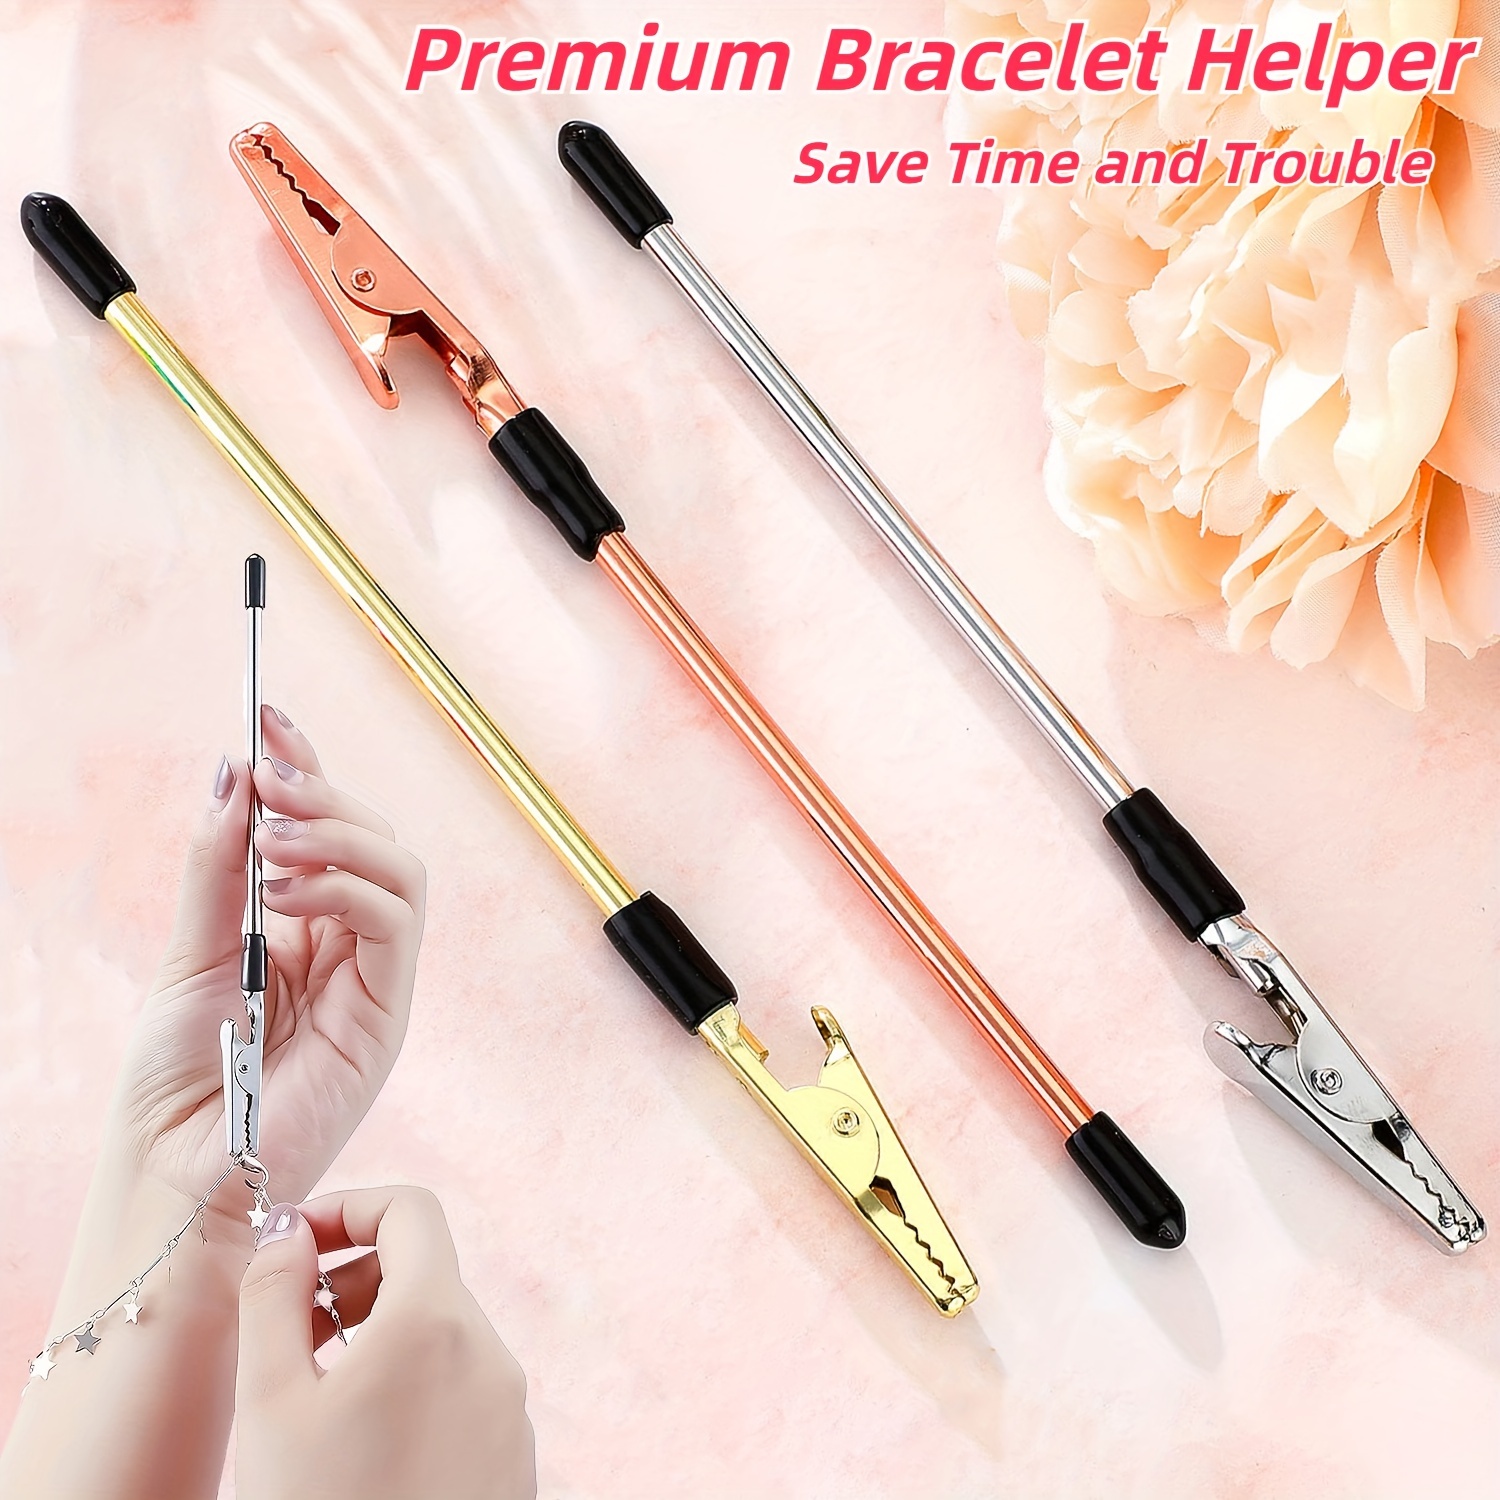 Bracelet Helper Tool - Fastener Helper Tool for Bracelet, Necklace, Jewelry,  Watch - Clasp Helper - Portable, Easy-to-Use, Made of Metal Gold